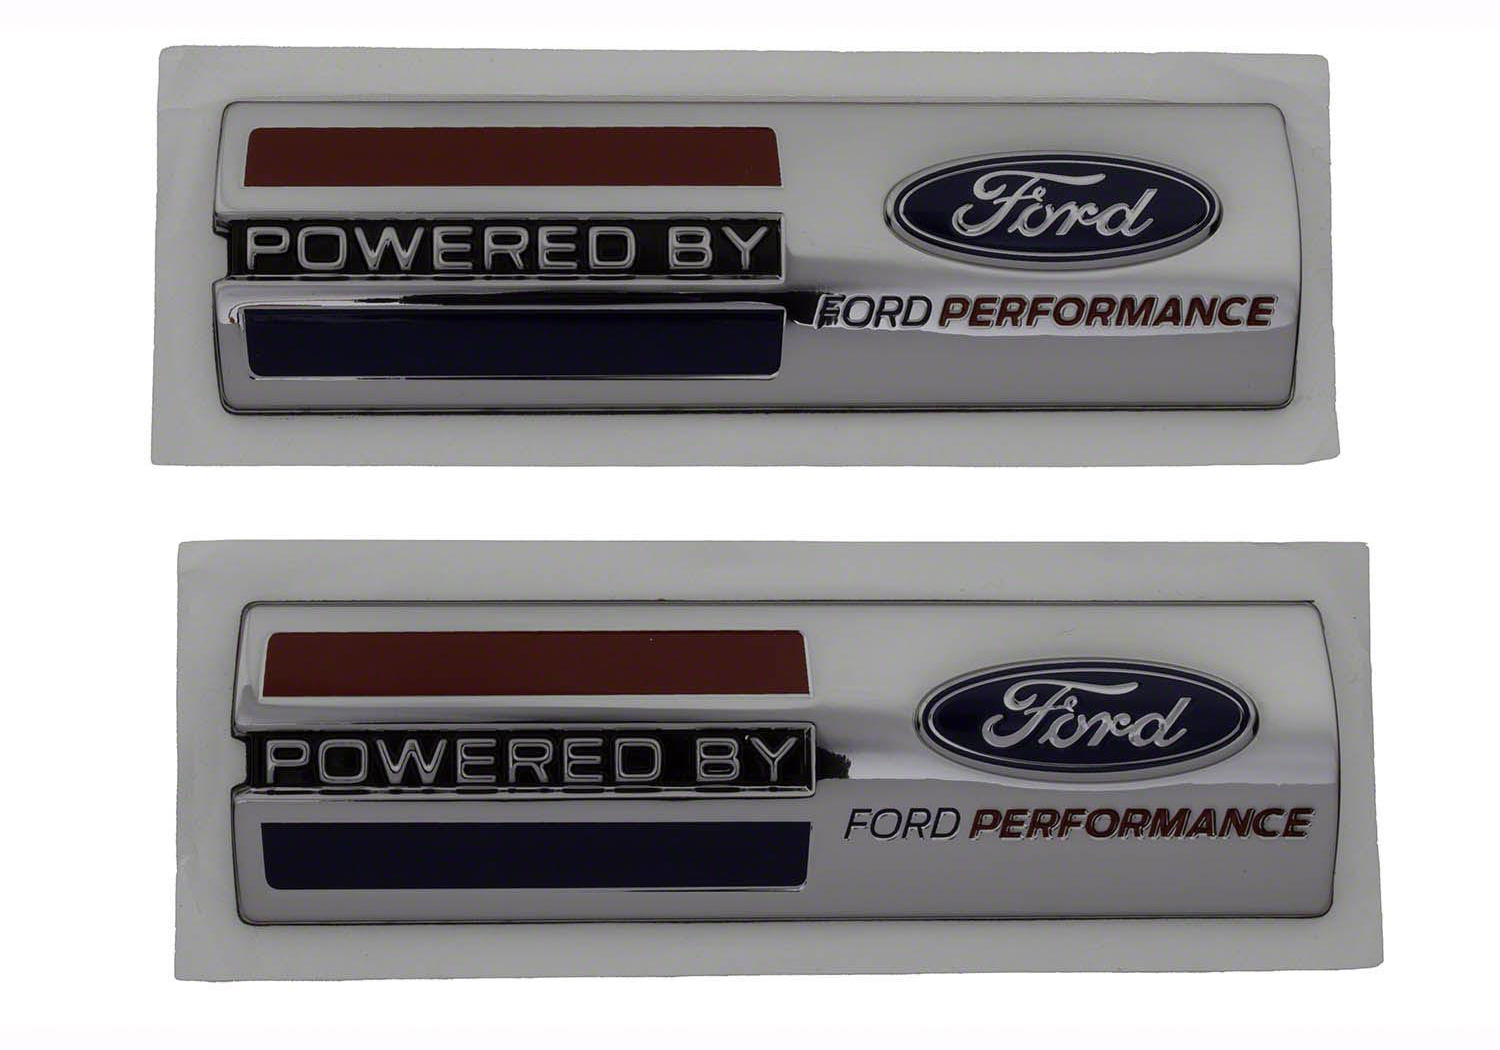 POWERED BY FORD PERFORMANCE BADGE, Part Details for M-16098-PBFP